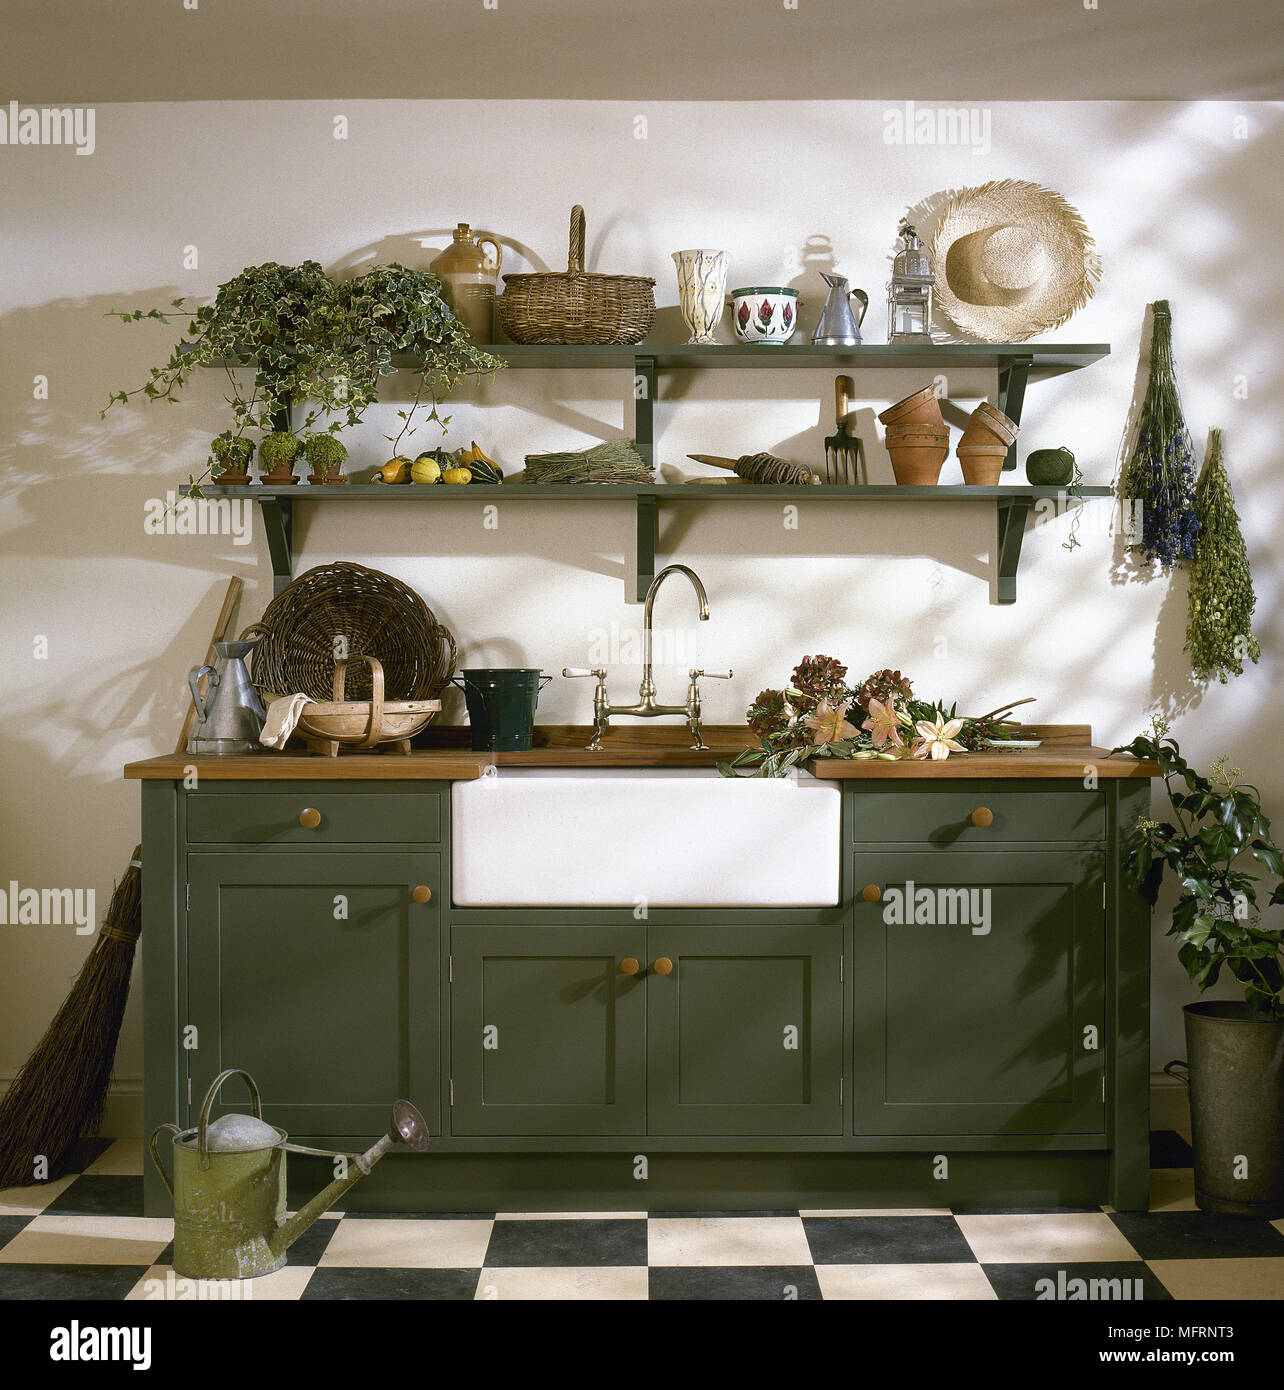 https://c8.alamy.com/comp/MFRNT3/country-style-kitchen-with-painted-cabinet-with-inset-butler-sink-and-shelves-above-MFRNT3.jpg